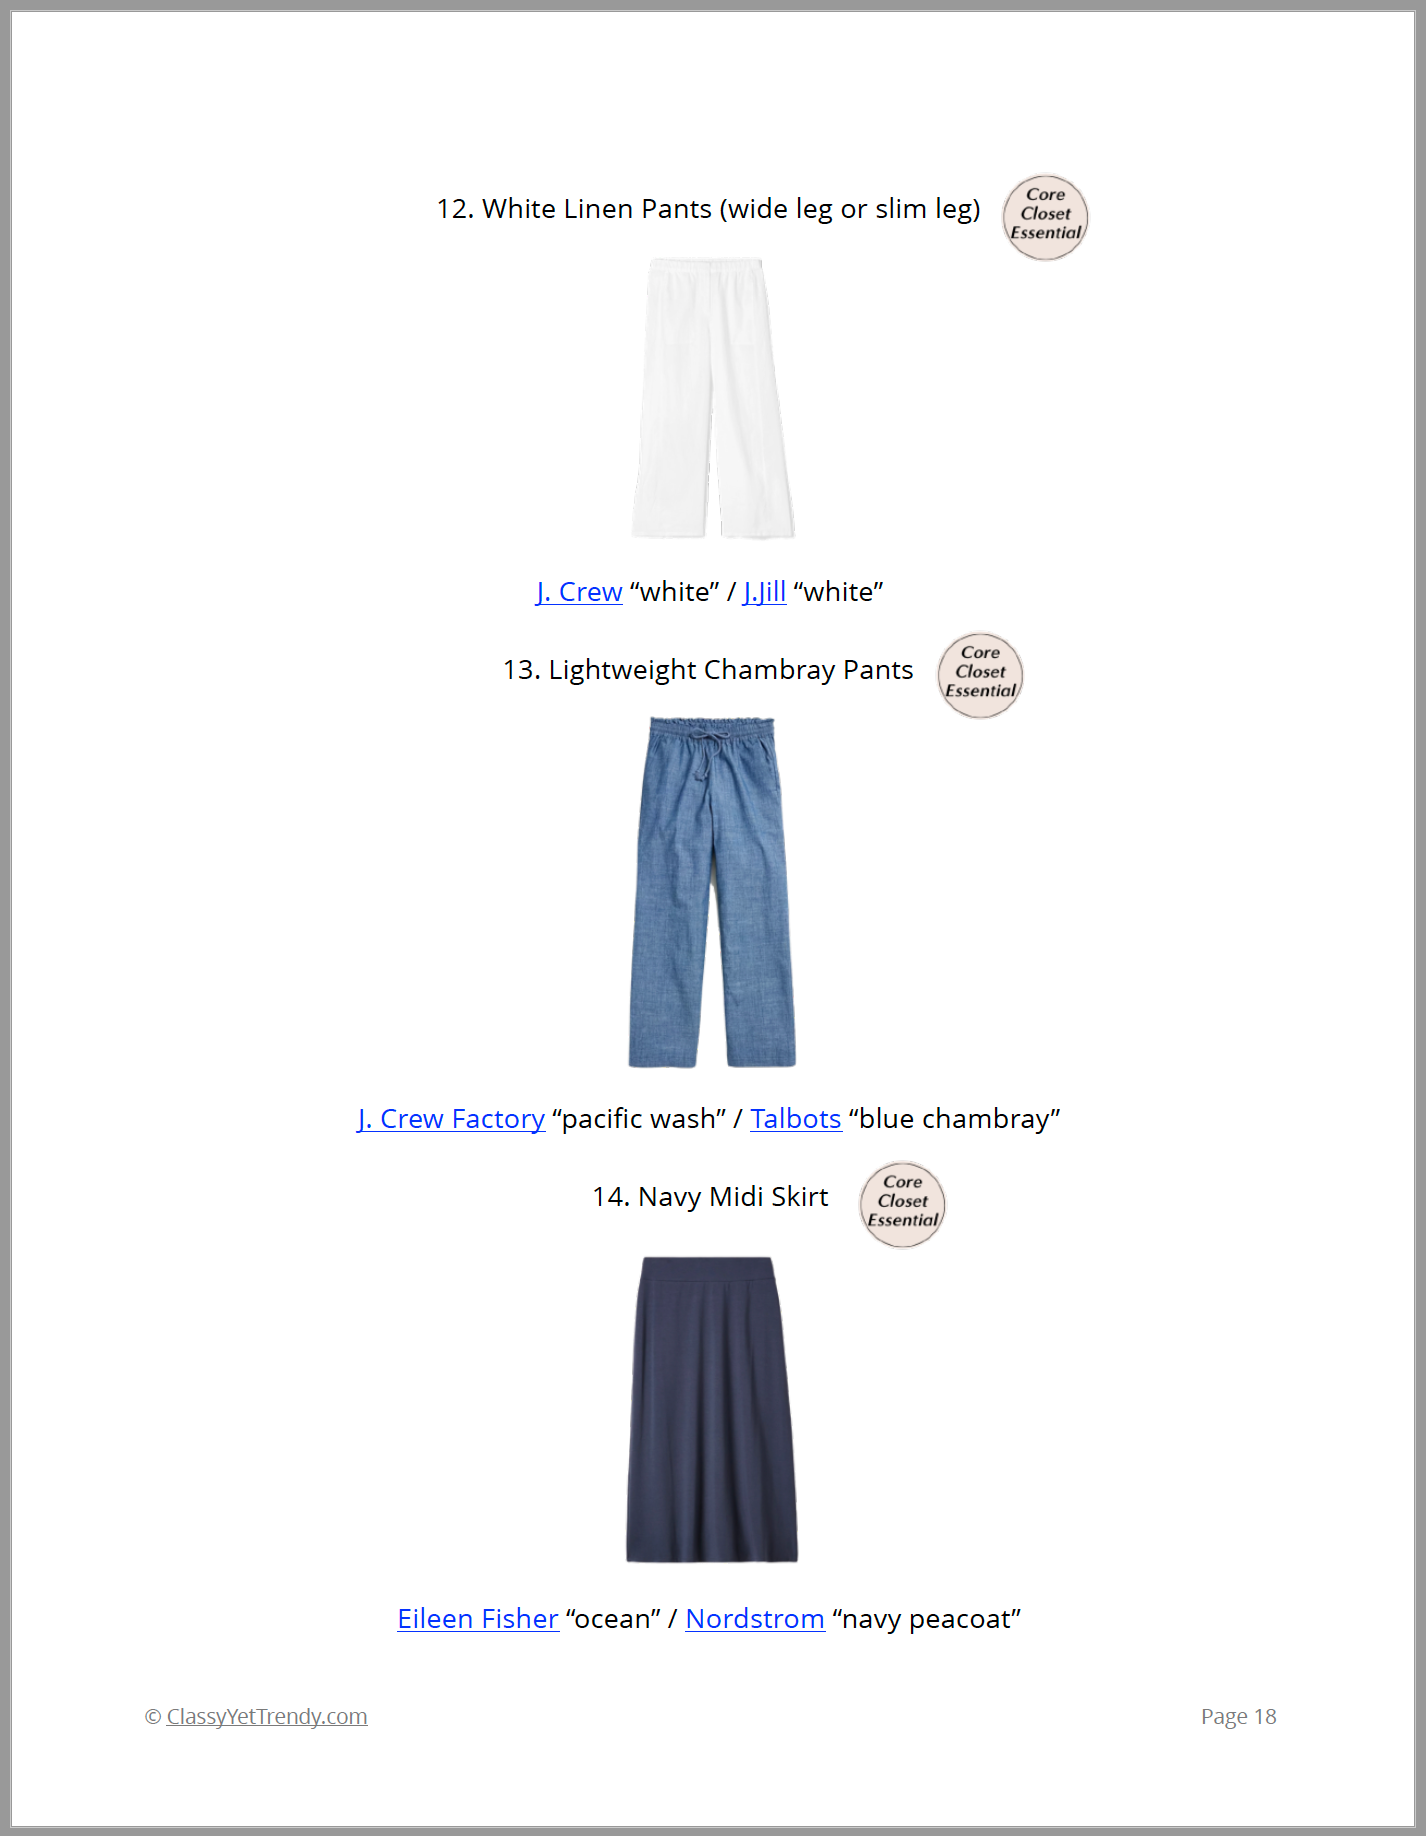 J.Jill clothing - a complete casual capsule wardrobe